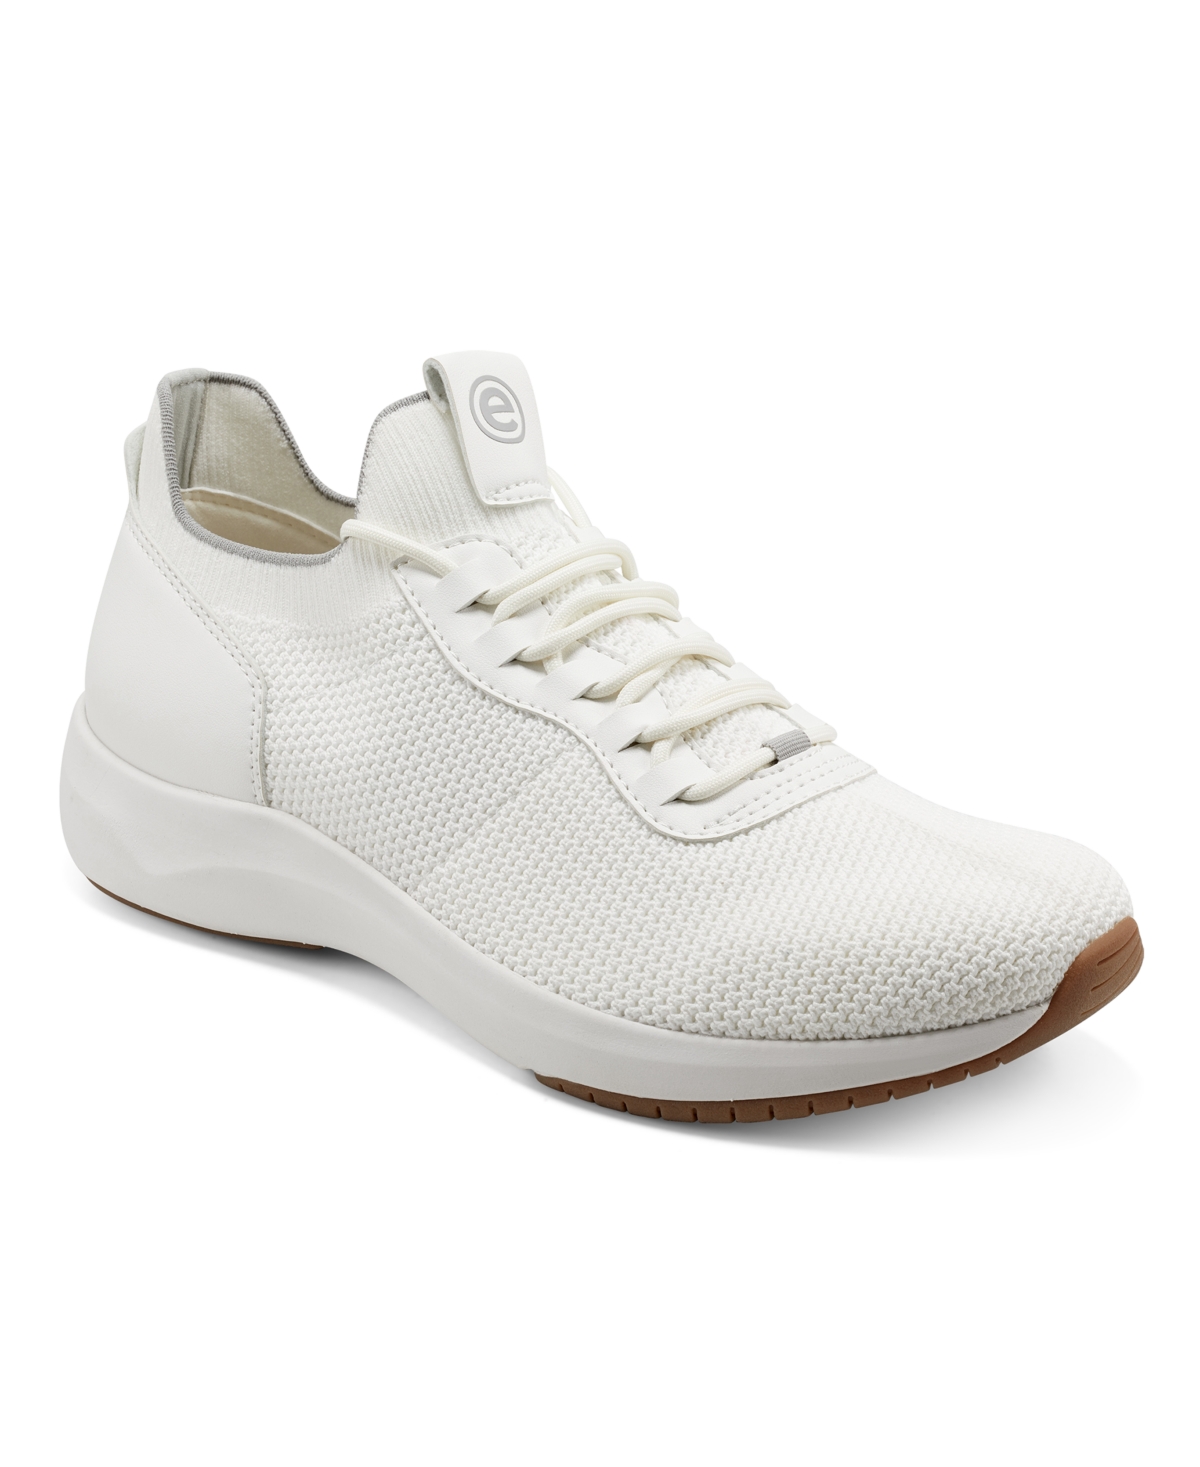 Men's Hardy Casual Sneakers - White